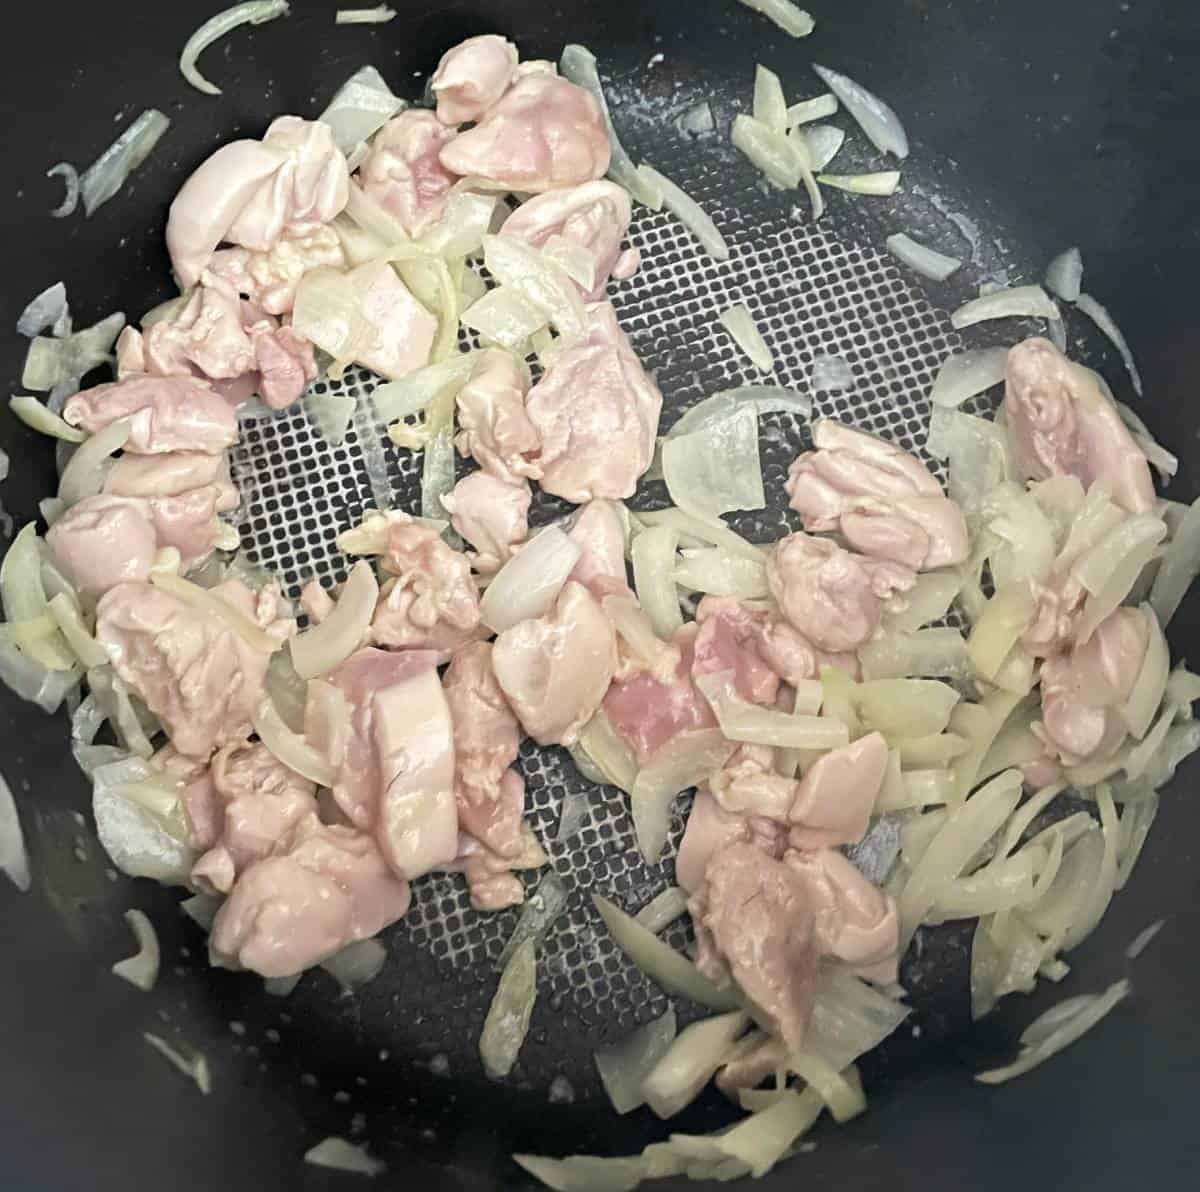 chicken starting to turn white as it cooks in a black pan along with some onions.